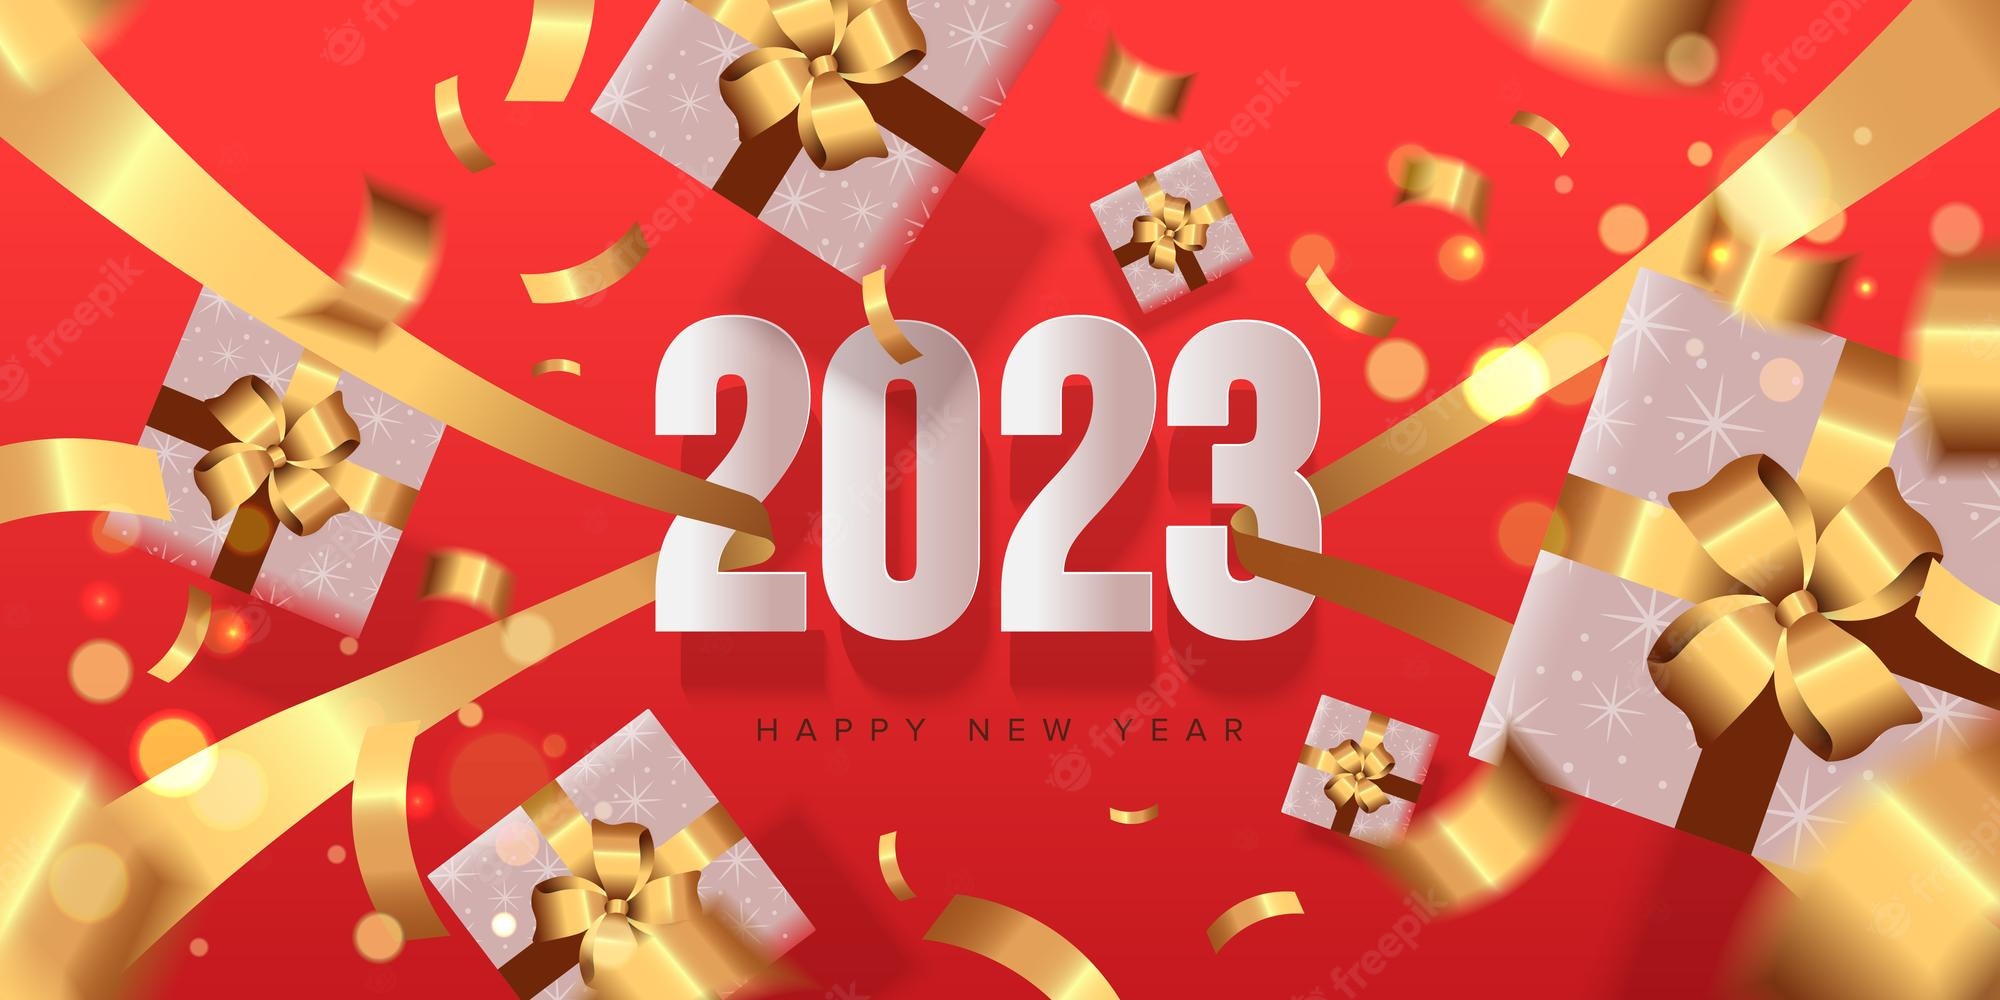 Premium Vector. Happy new year 2023 with number hanging on the ribbon and drop gift box from the top view